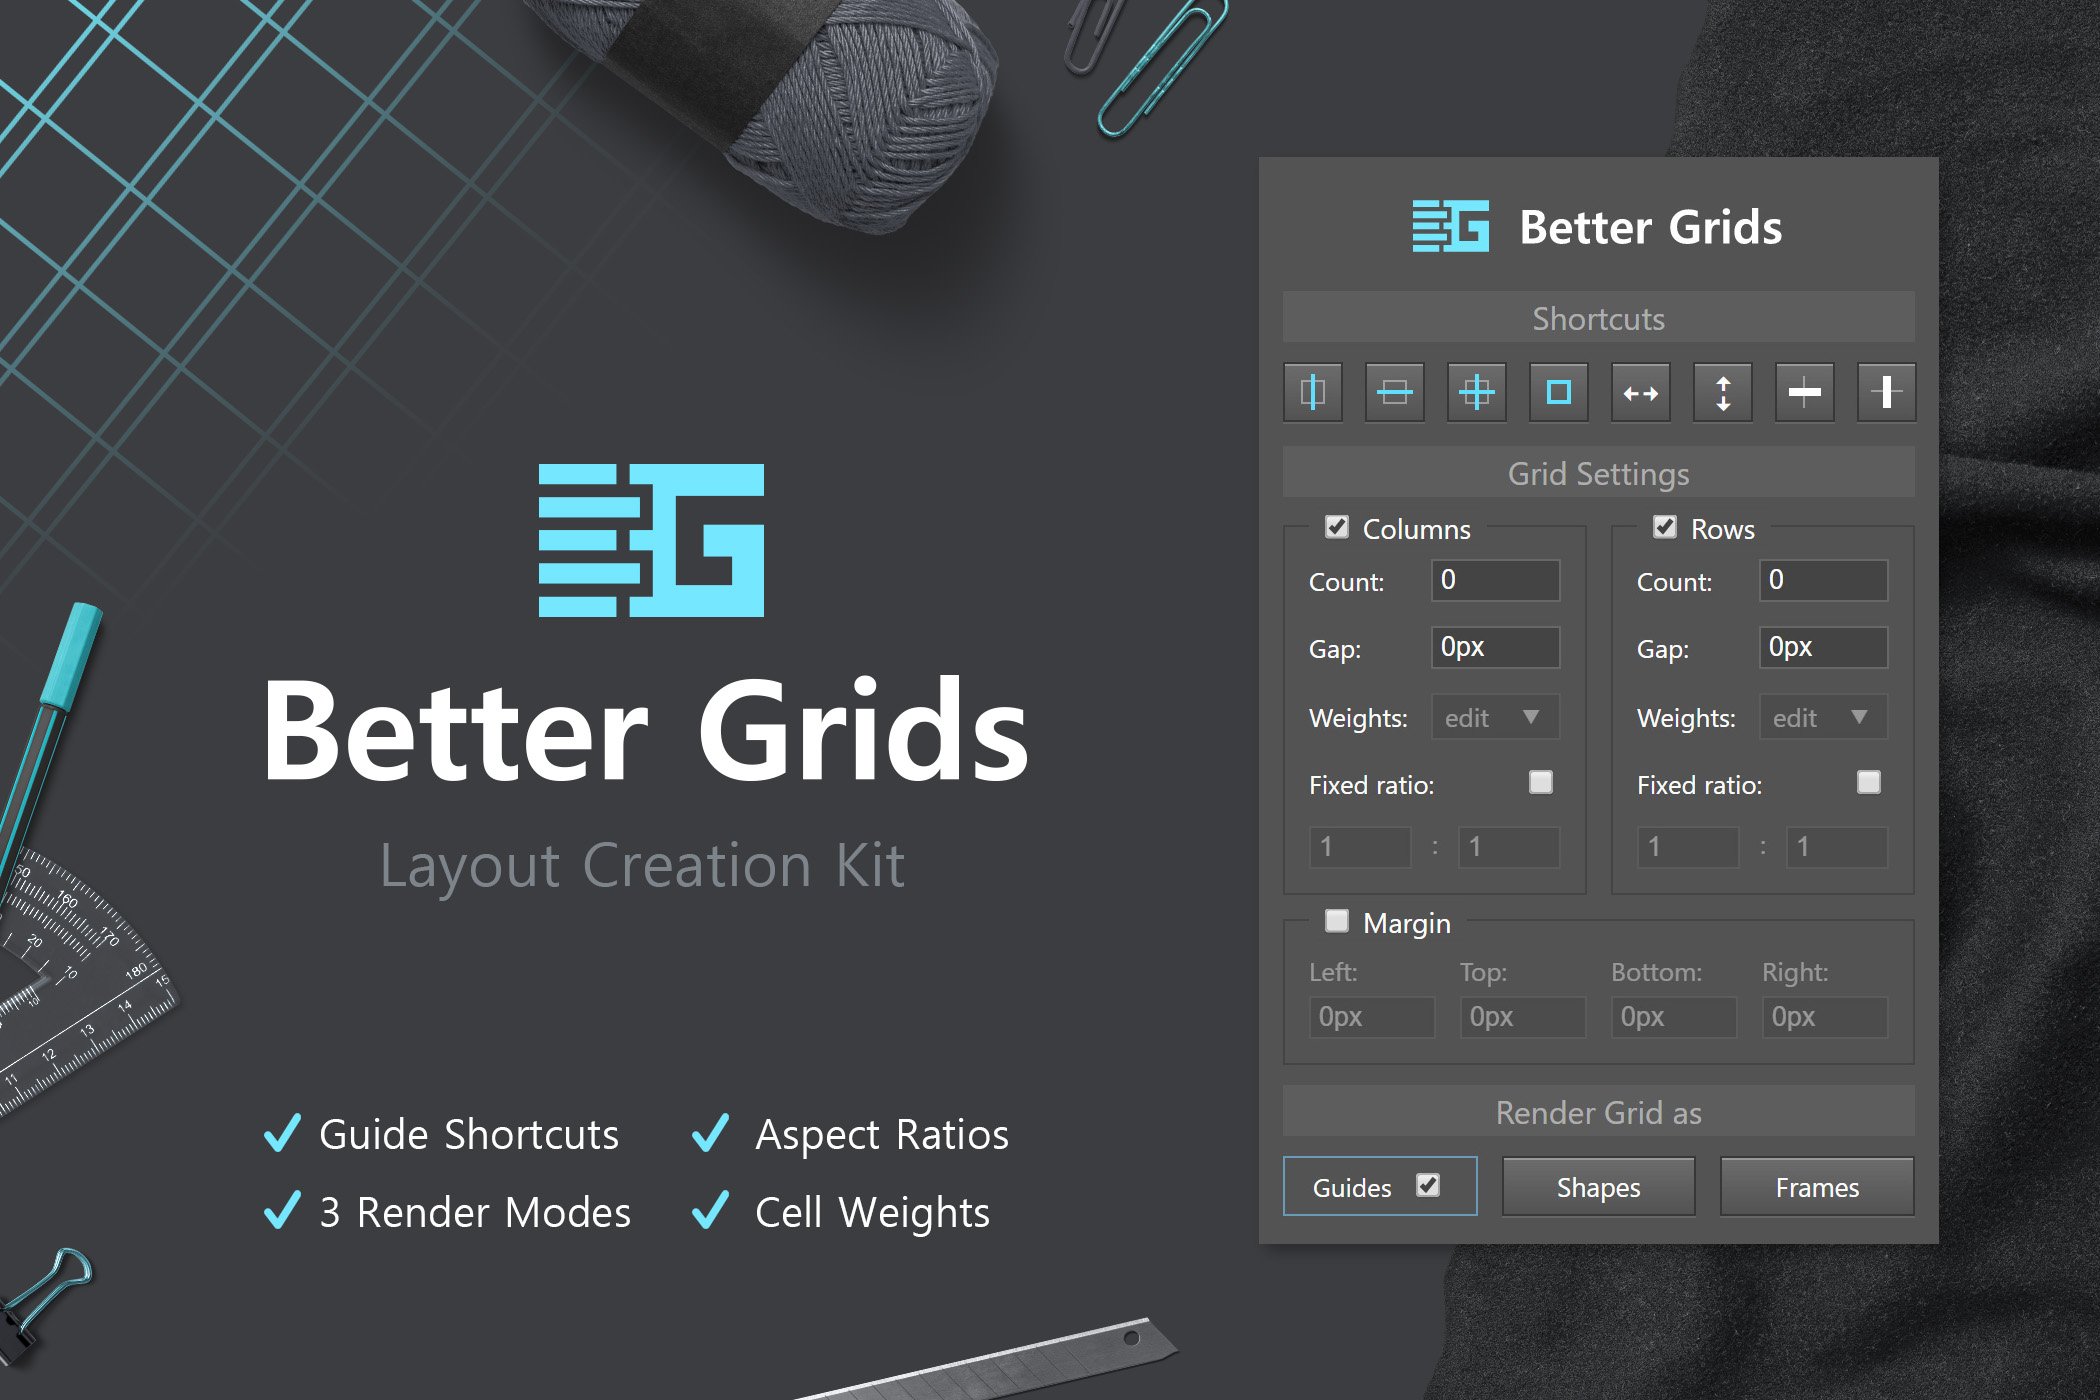 Better Grids - Layout Creation Kitcover image.